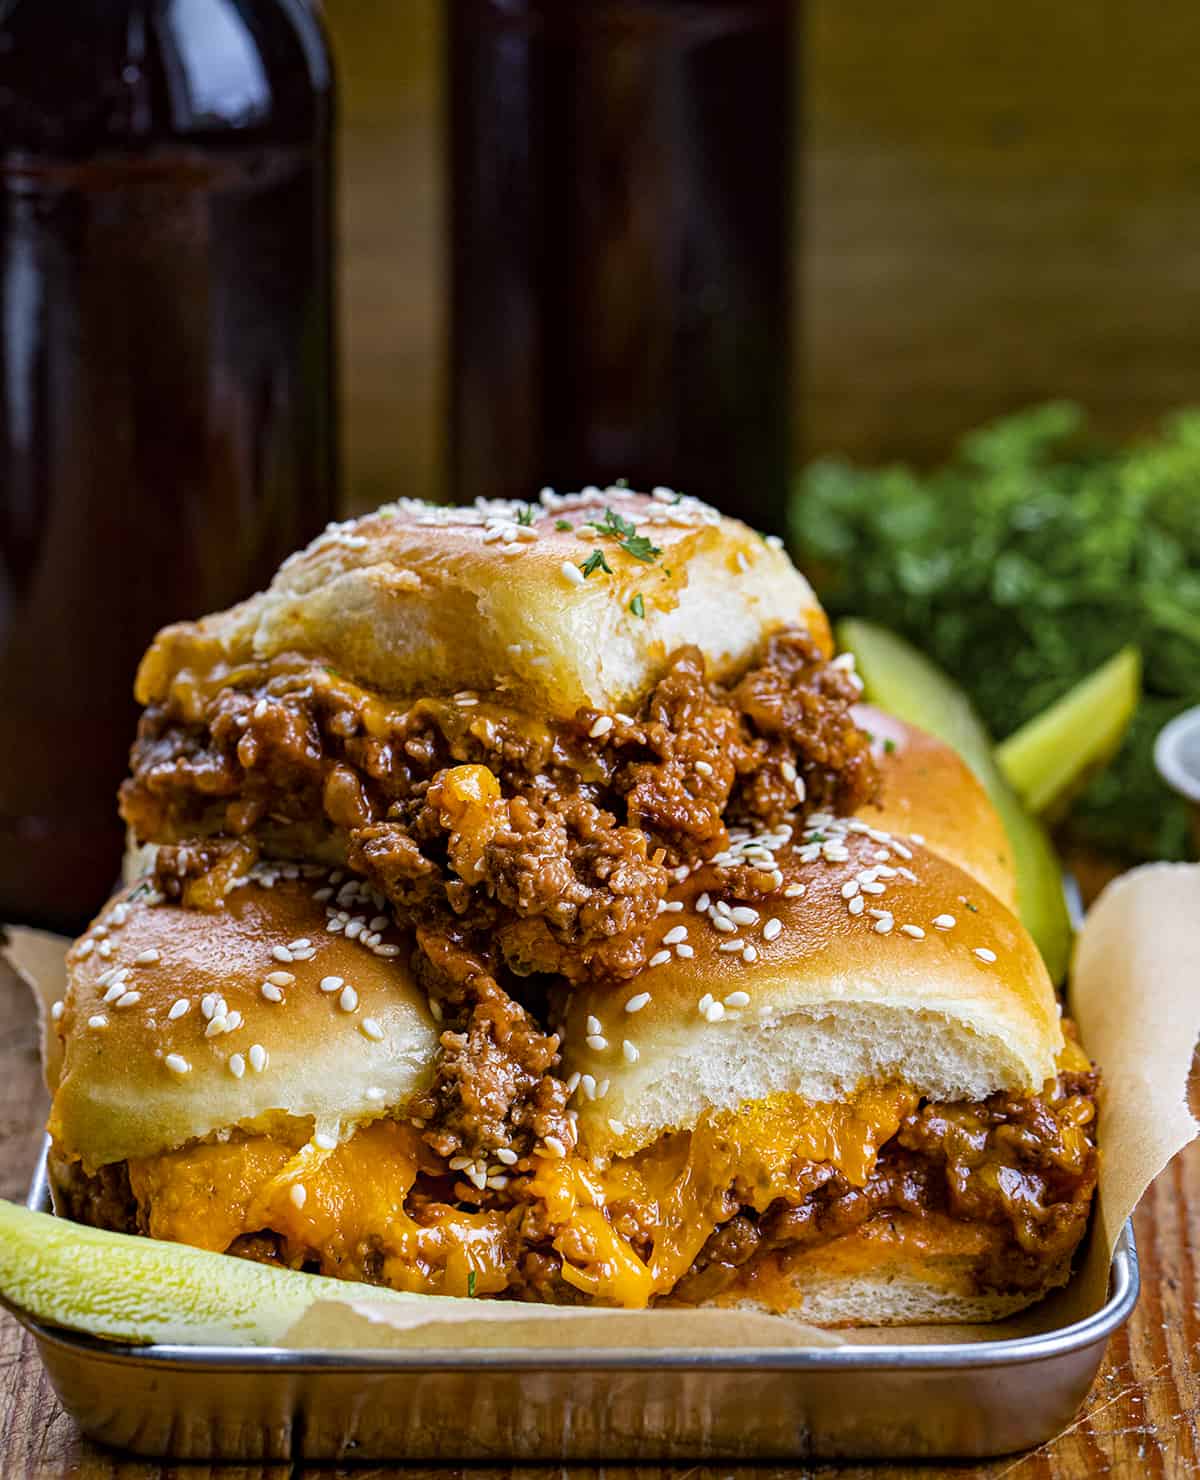 Sloppy Joe Sliders on a Try Stacked up and Filling Spilling out.